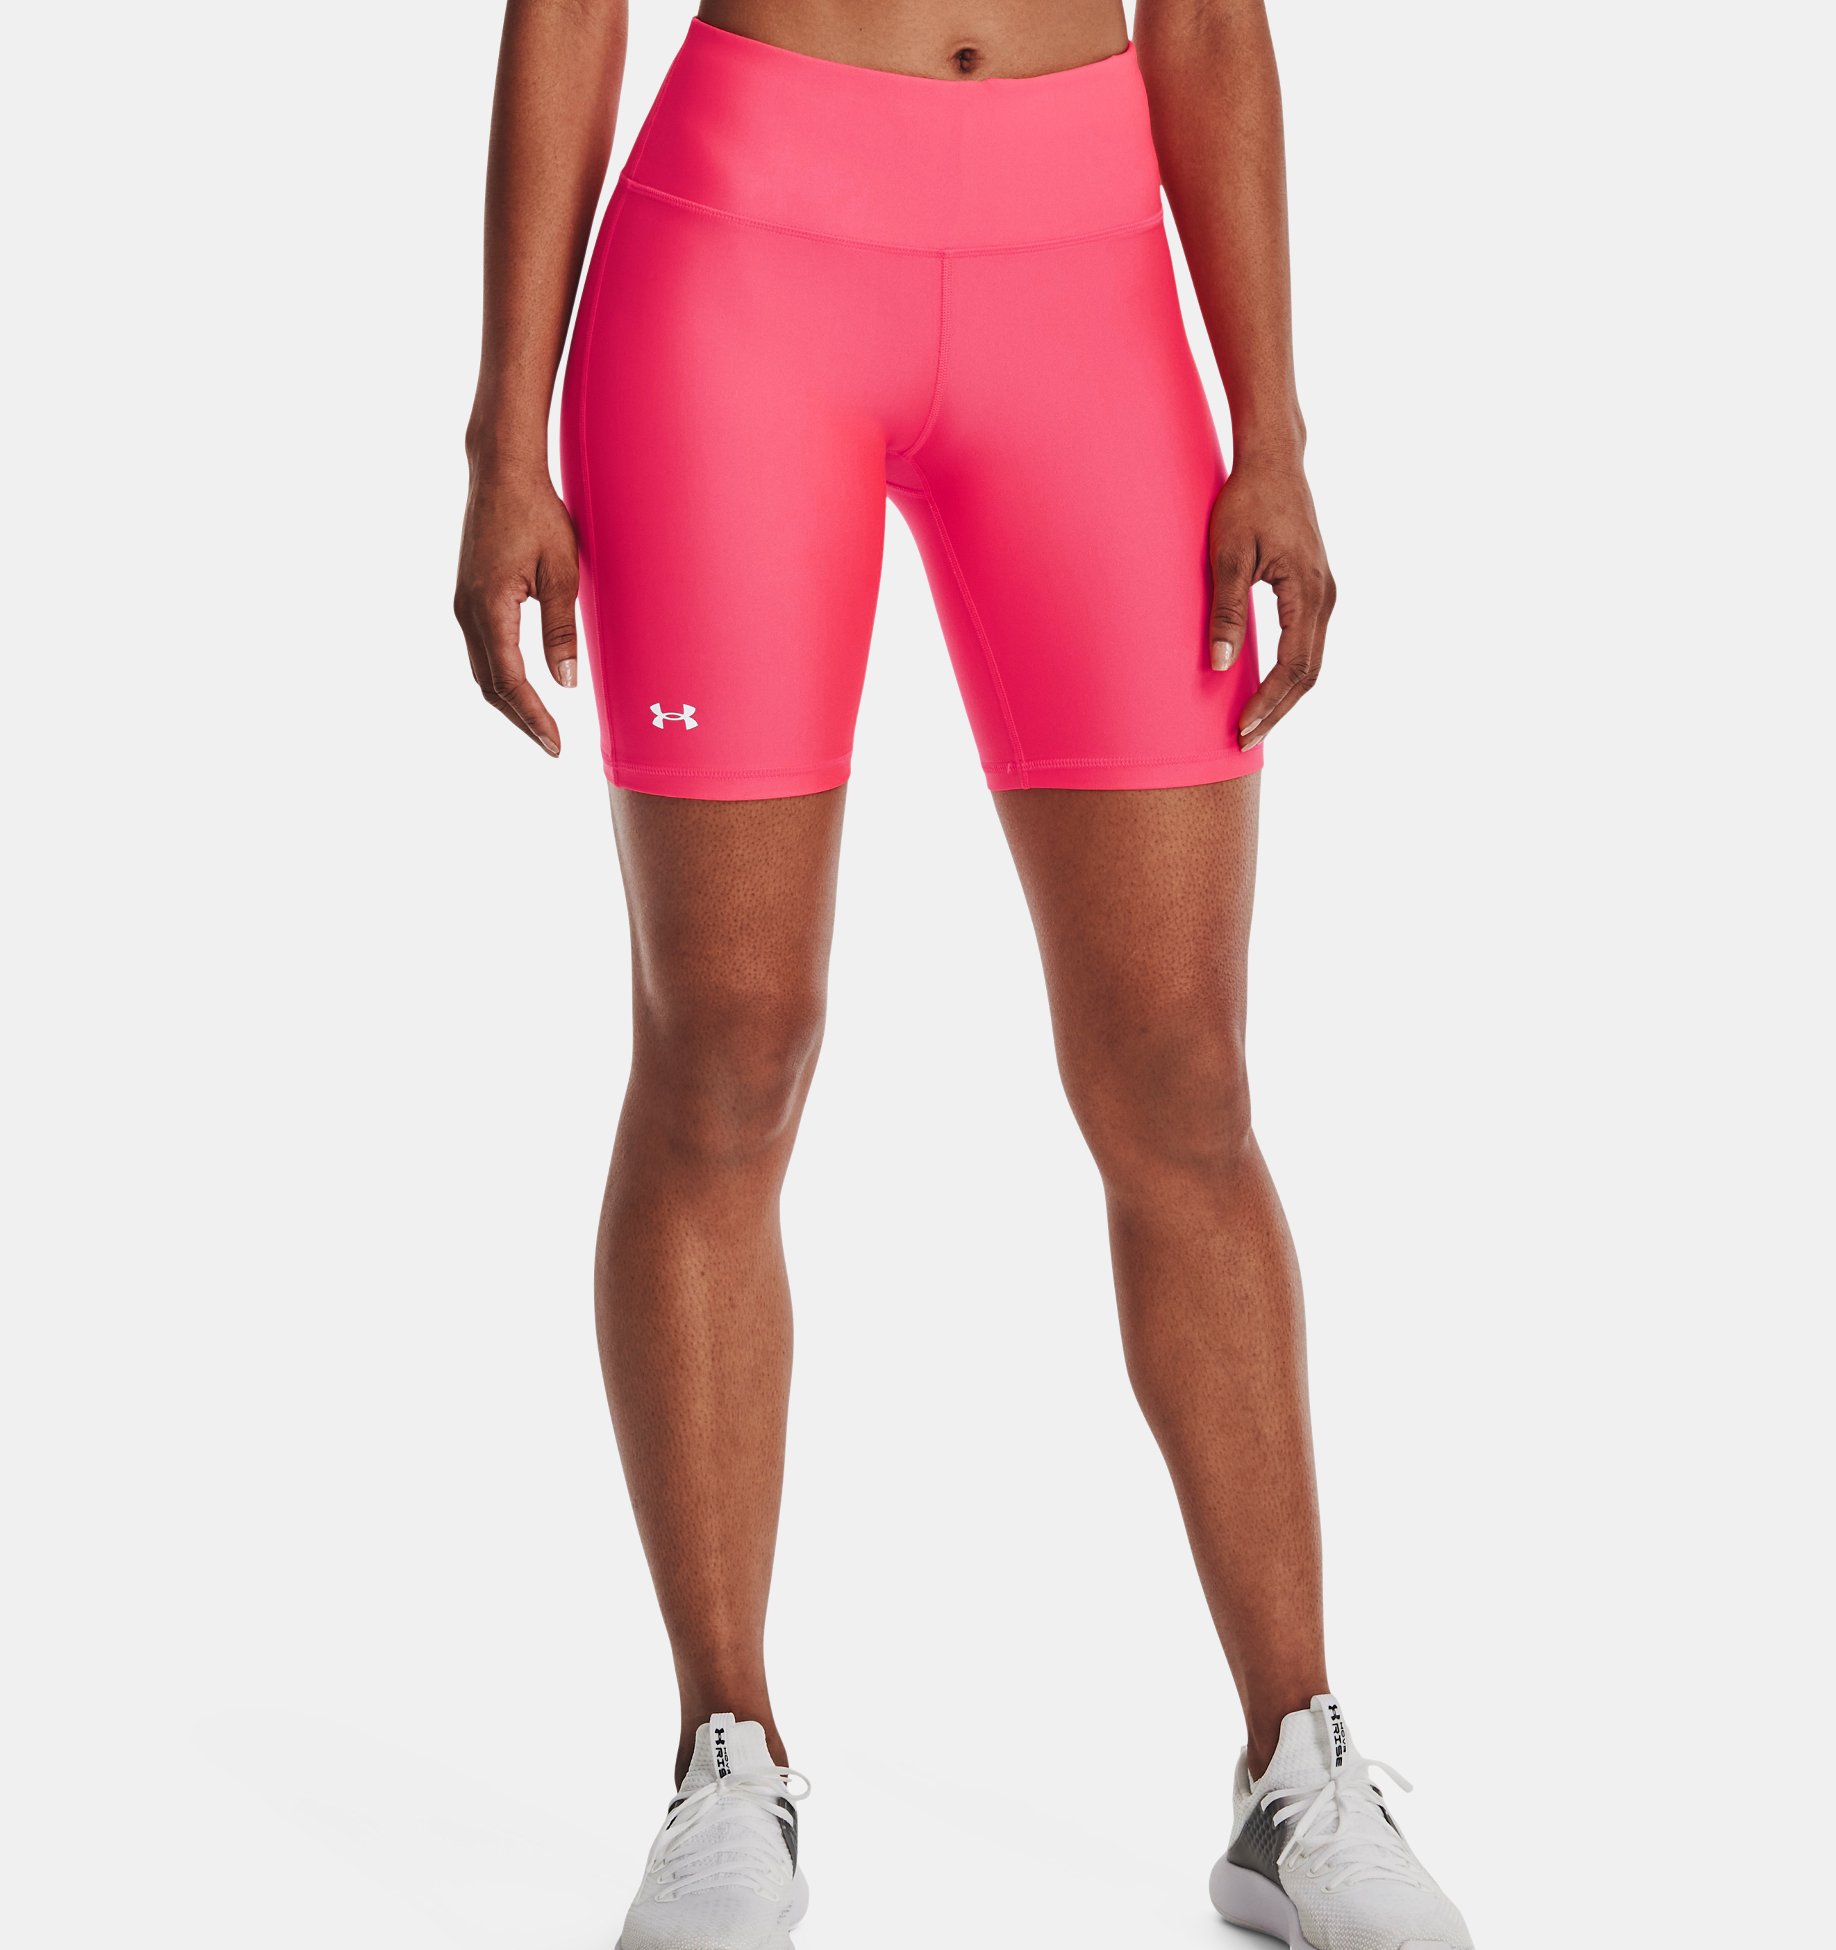 Womens Workout Shorts Youth Youth Girls Hot Pink Lacrosse Shorts Pink